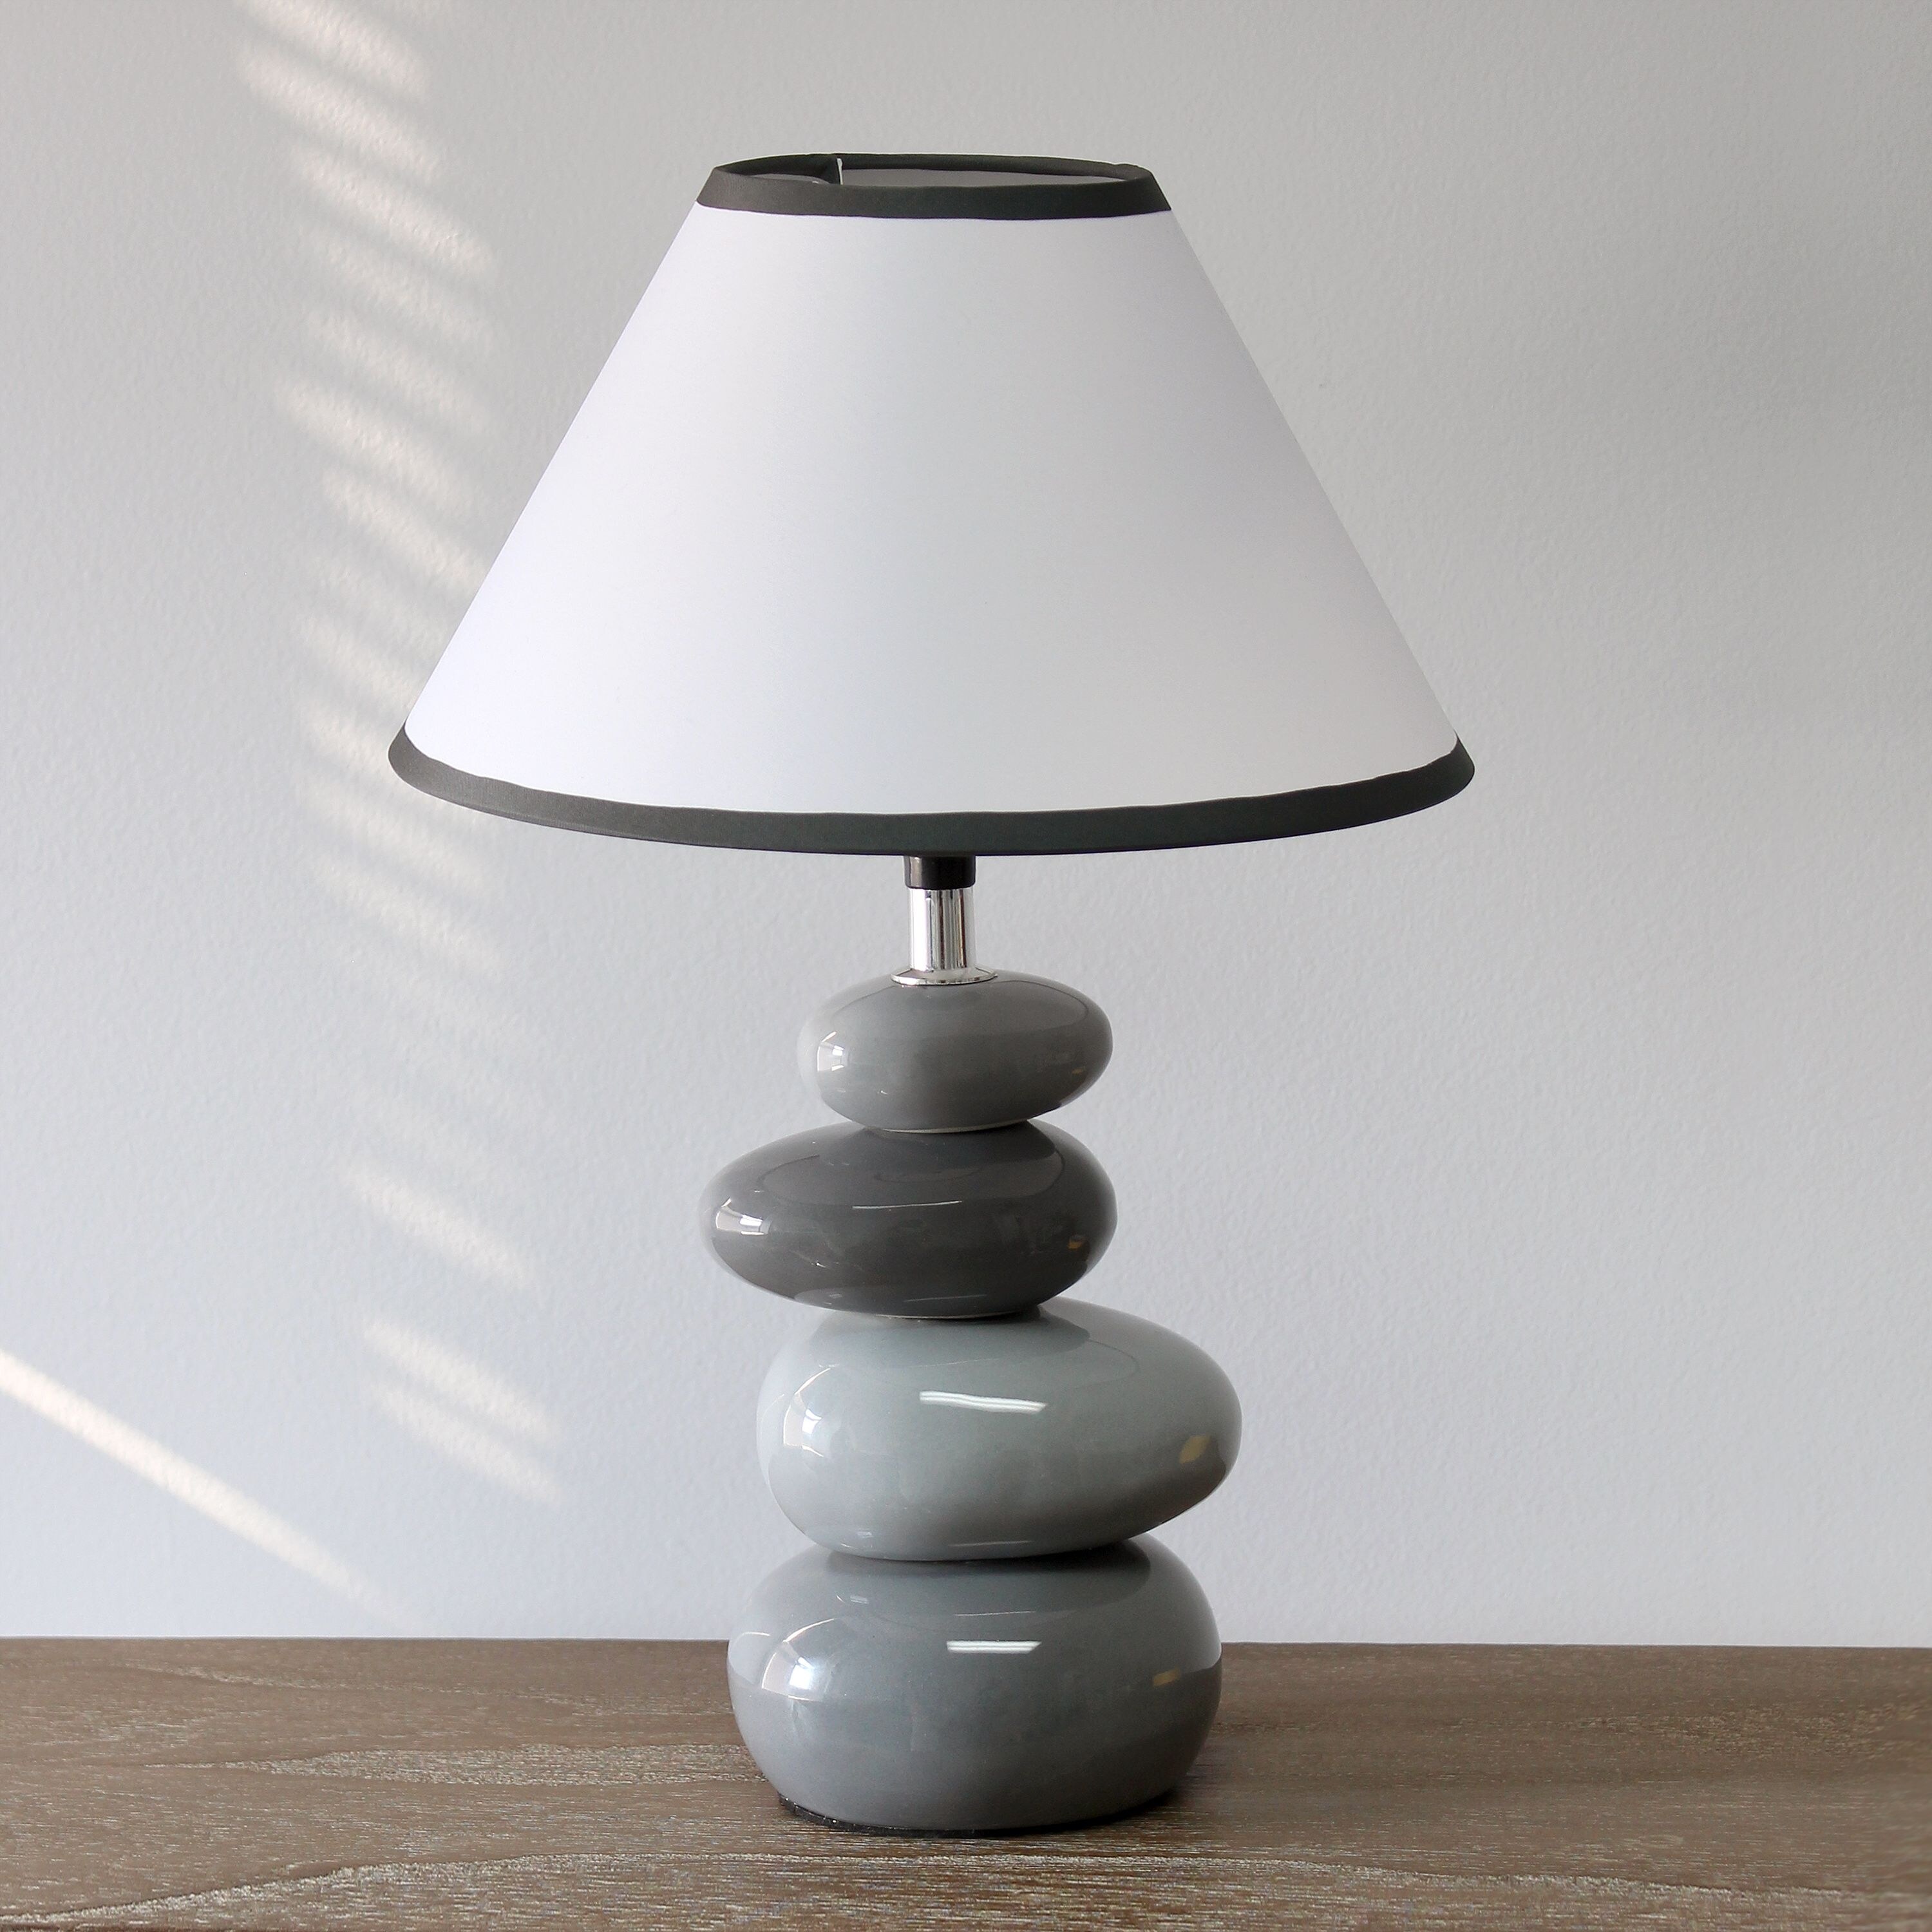 Simple Designs Shades of Gray Ceramic Stone Table Lamp - 9.75L X 9.75W X  14.75H - Bed Bath & Beyond - 35773814